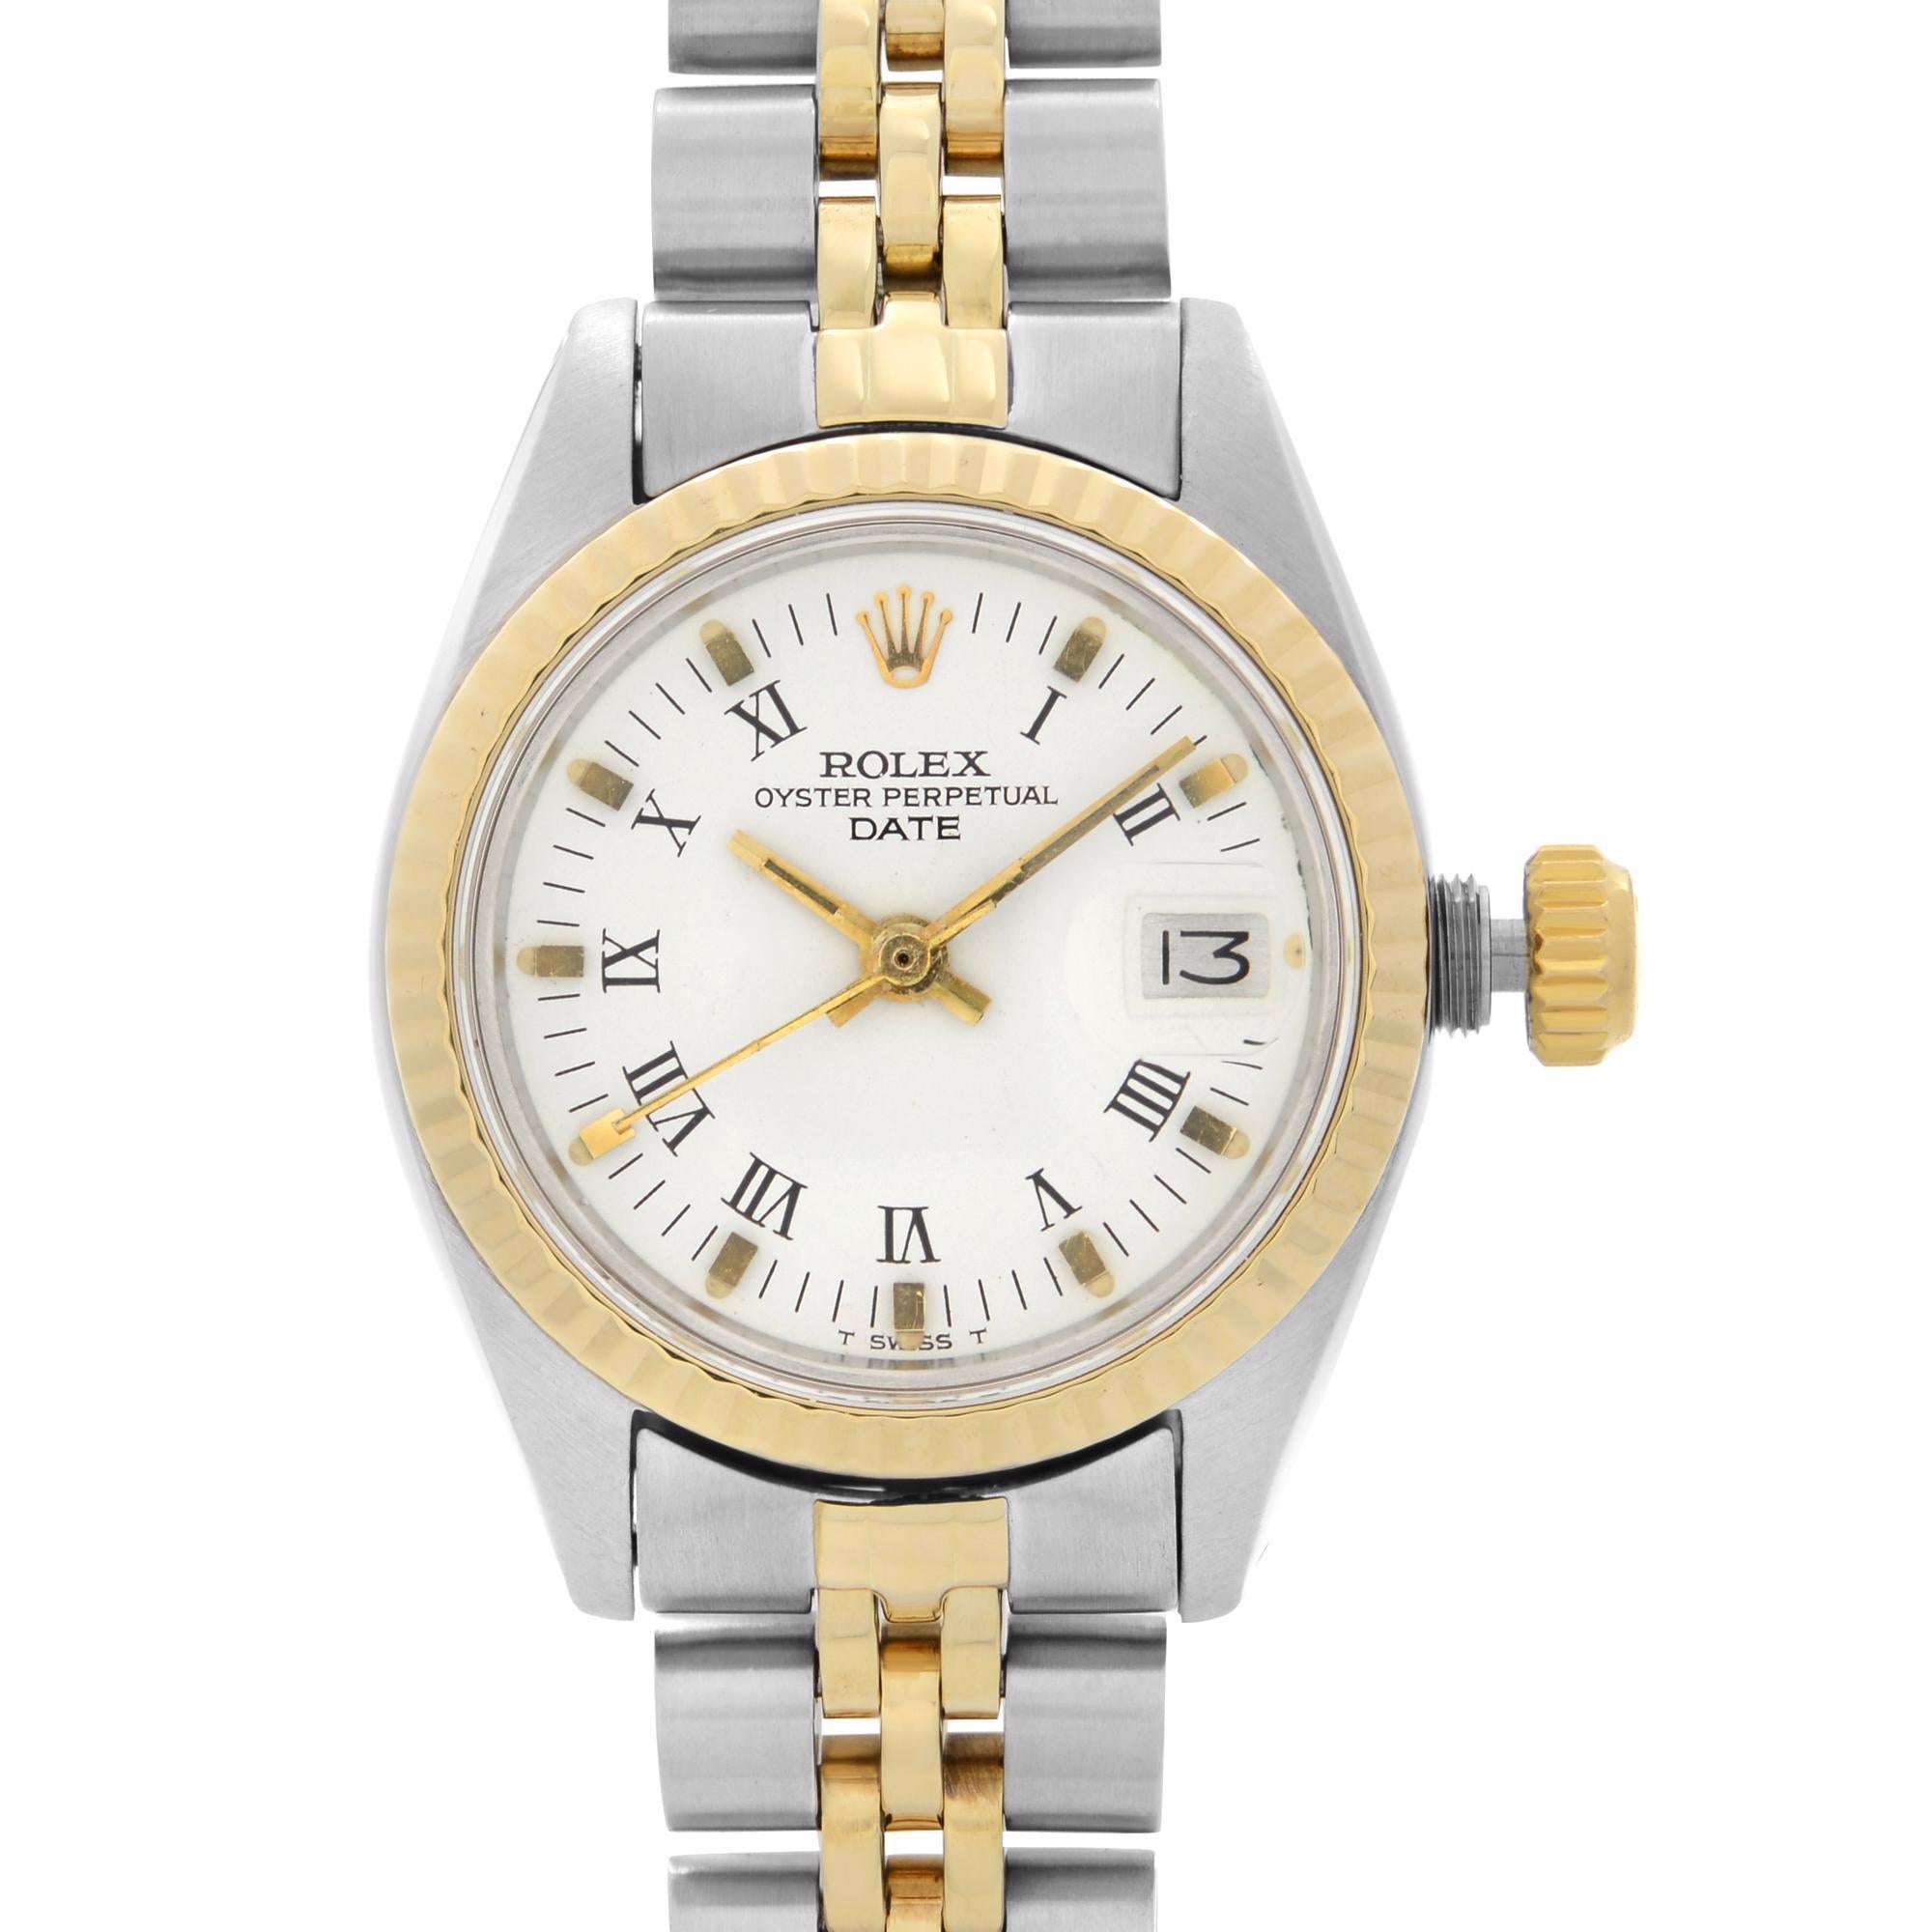 Pre-owned Vintage Rolex Date 26mm Steel Gold White Roman Dial Automatic Ladies Watch 6917. Dial have micro-scratches and dirt due to age.  Minor Discoloration on the Gold-Tone Hands And Hour Markers. The Bracelet has Moderate Slack. This Beautiful